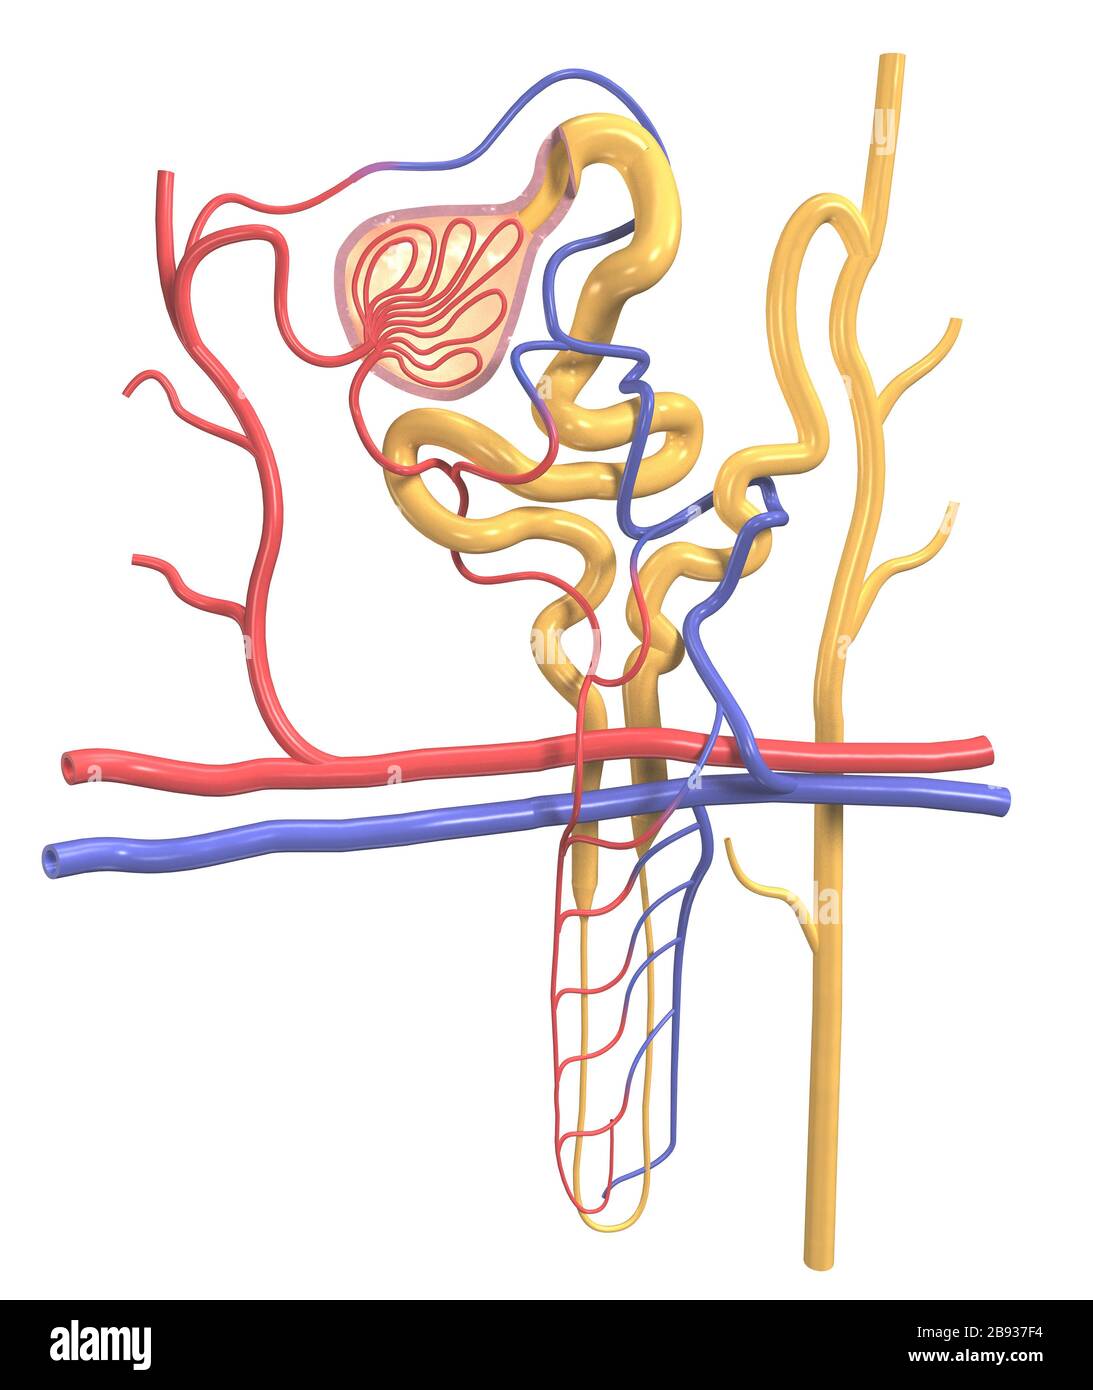 3D Illustration of the structure of a nephron, the basic structural and functional unit of the kidney Stock Photo